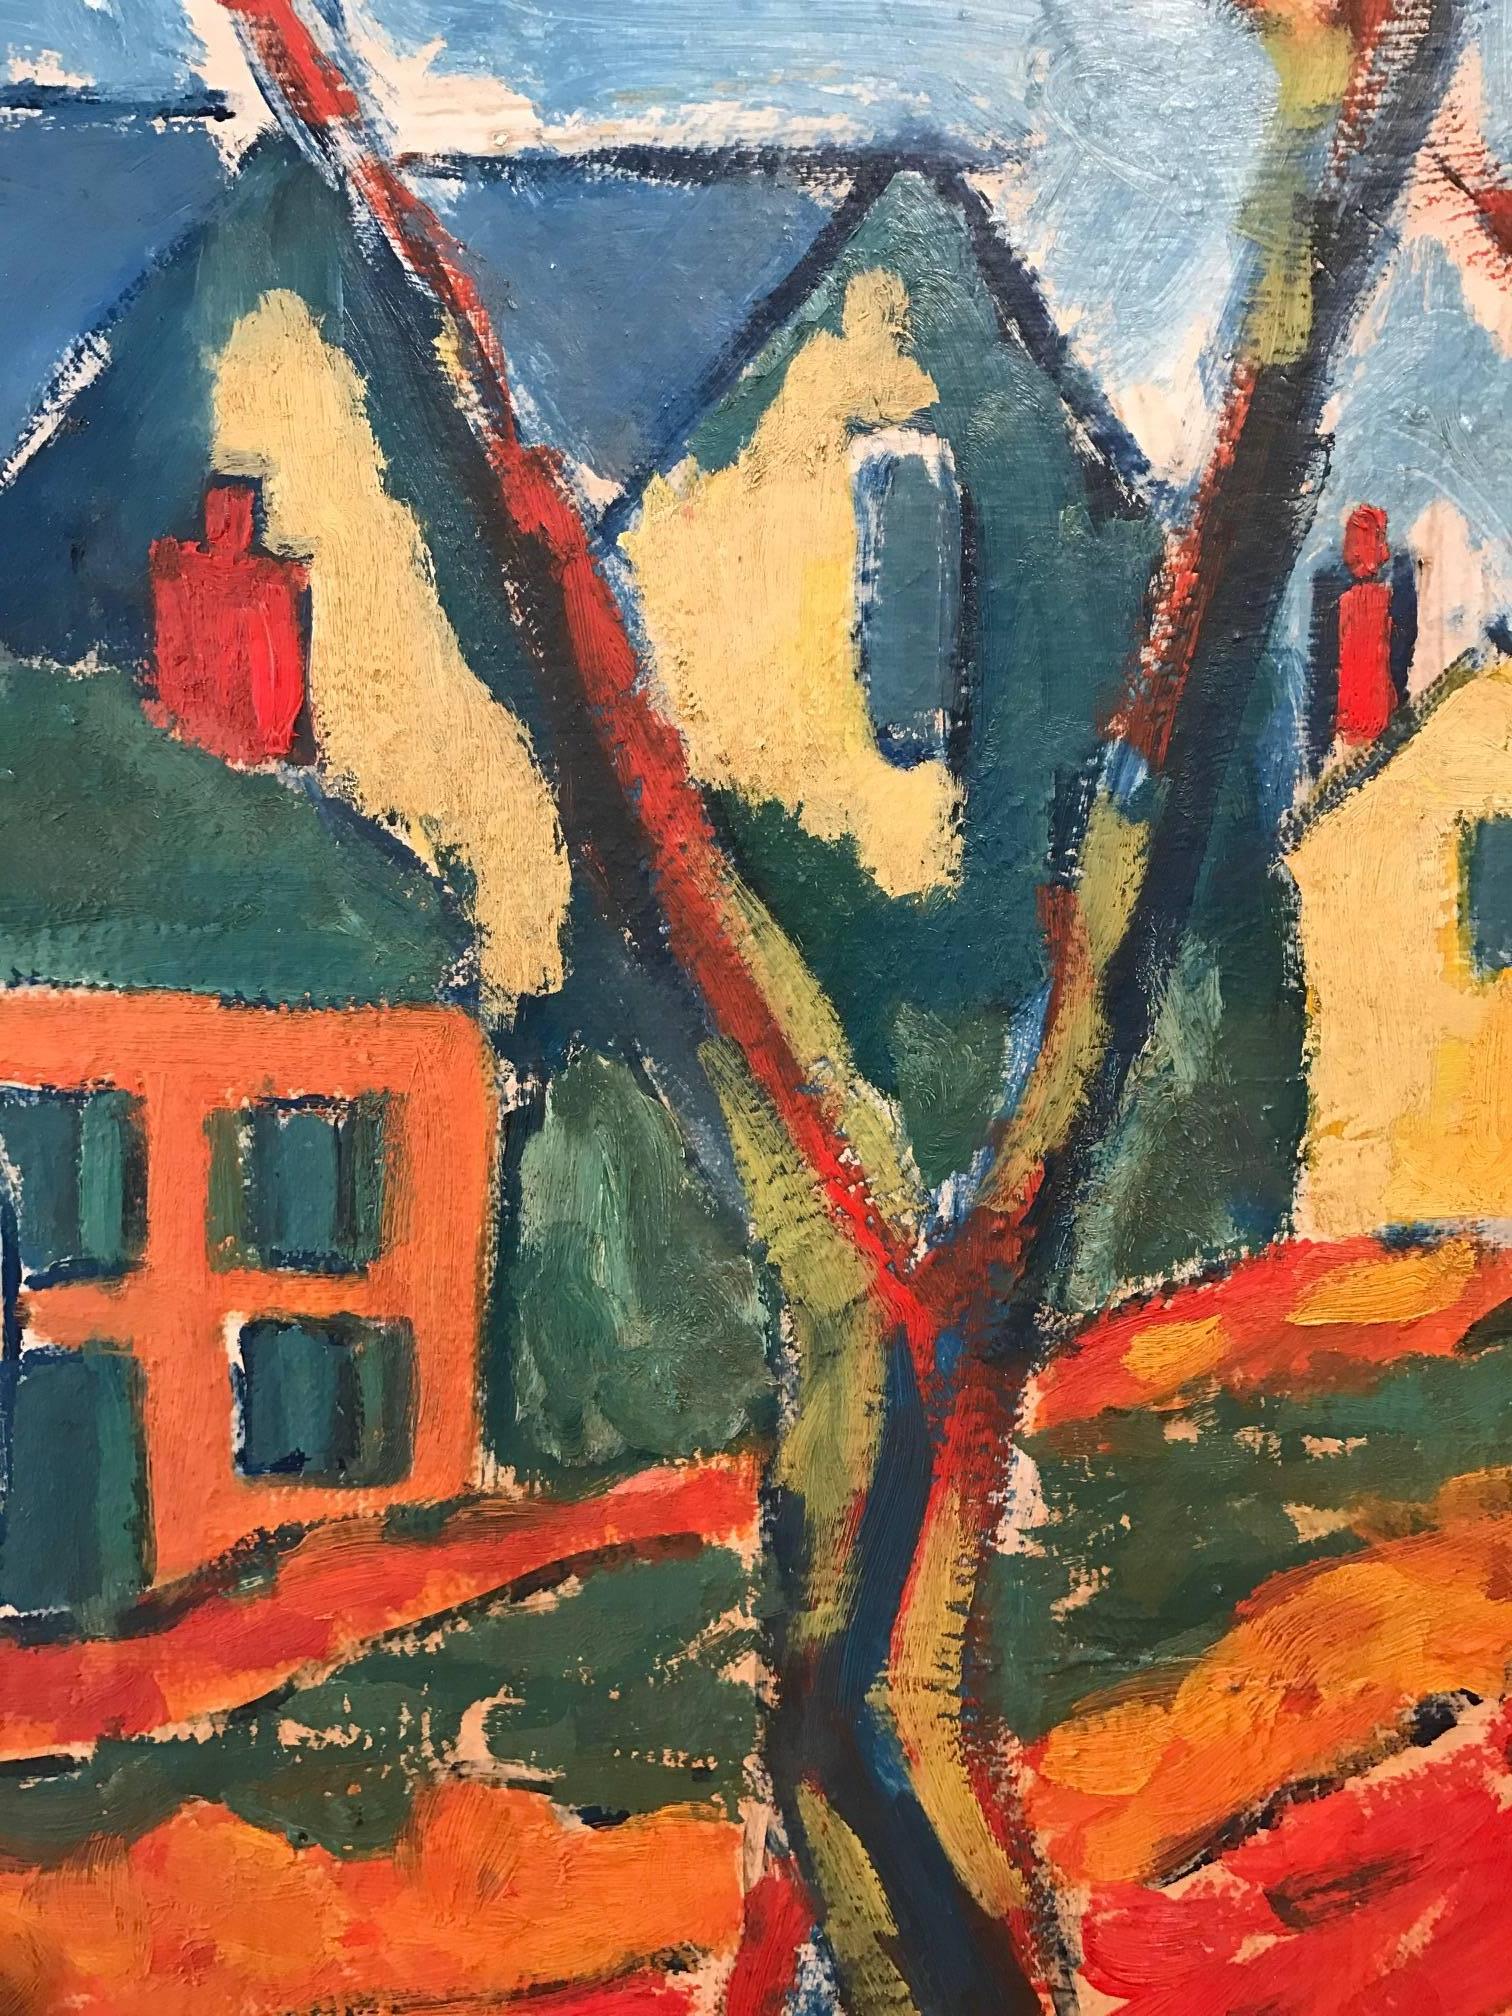 Superb 20th century French oil painting absolutely typical of the Fauvist movement. 

The painting depicts this colourful and vivid French street scene with a restaurant to the side. 

Fauvism is the style of les Fauves (French for "the